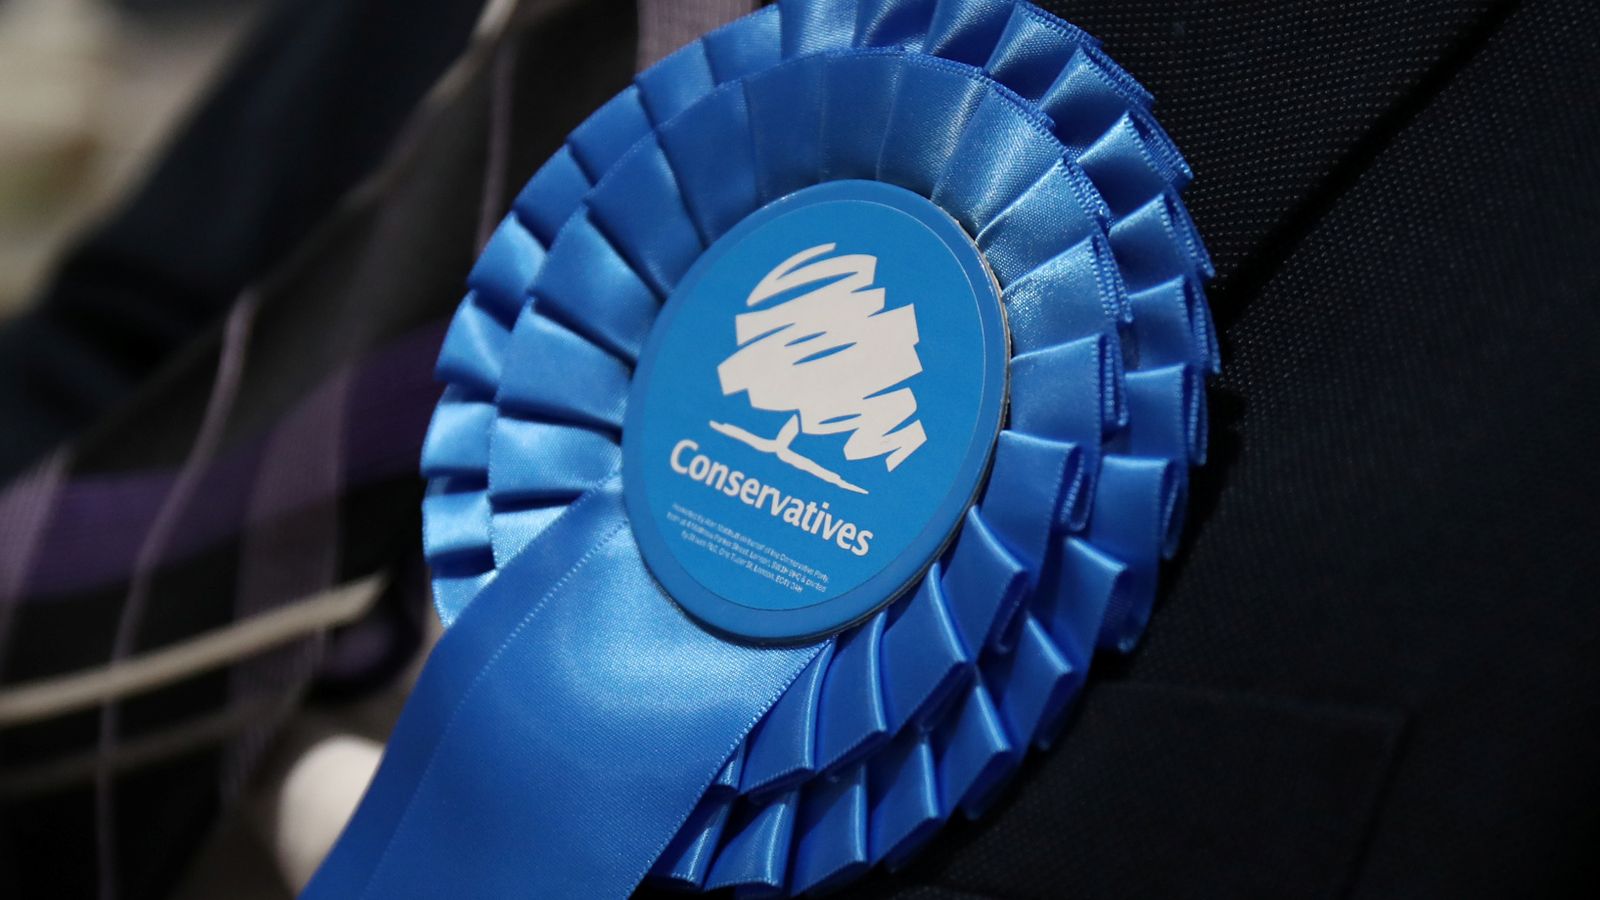 'We're in the death throes and I can't quite see a way forward': Tories face prospect of a triple by-election defeat